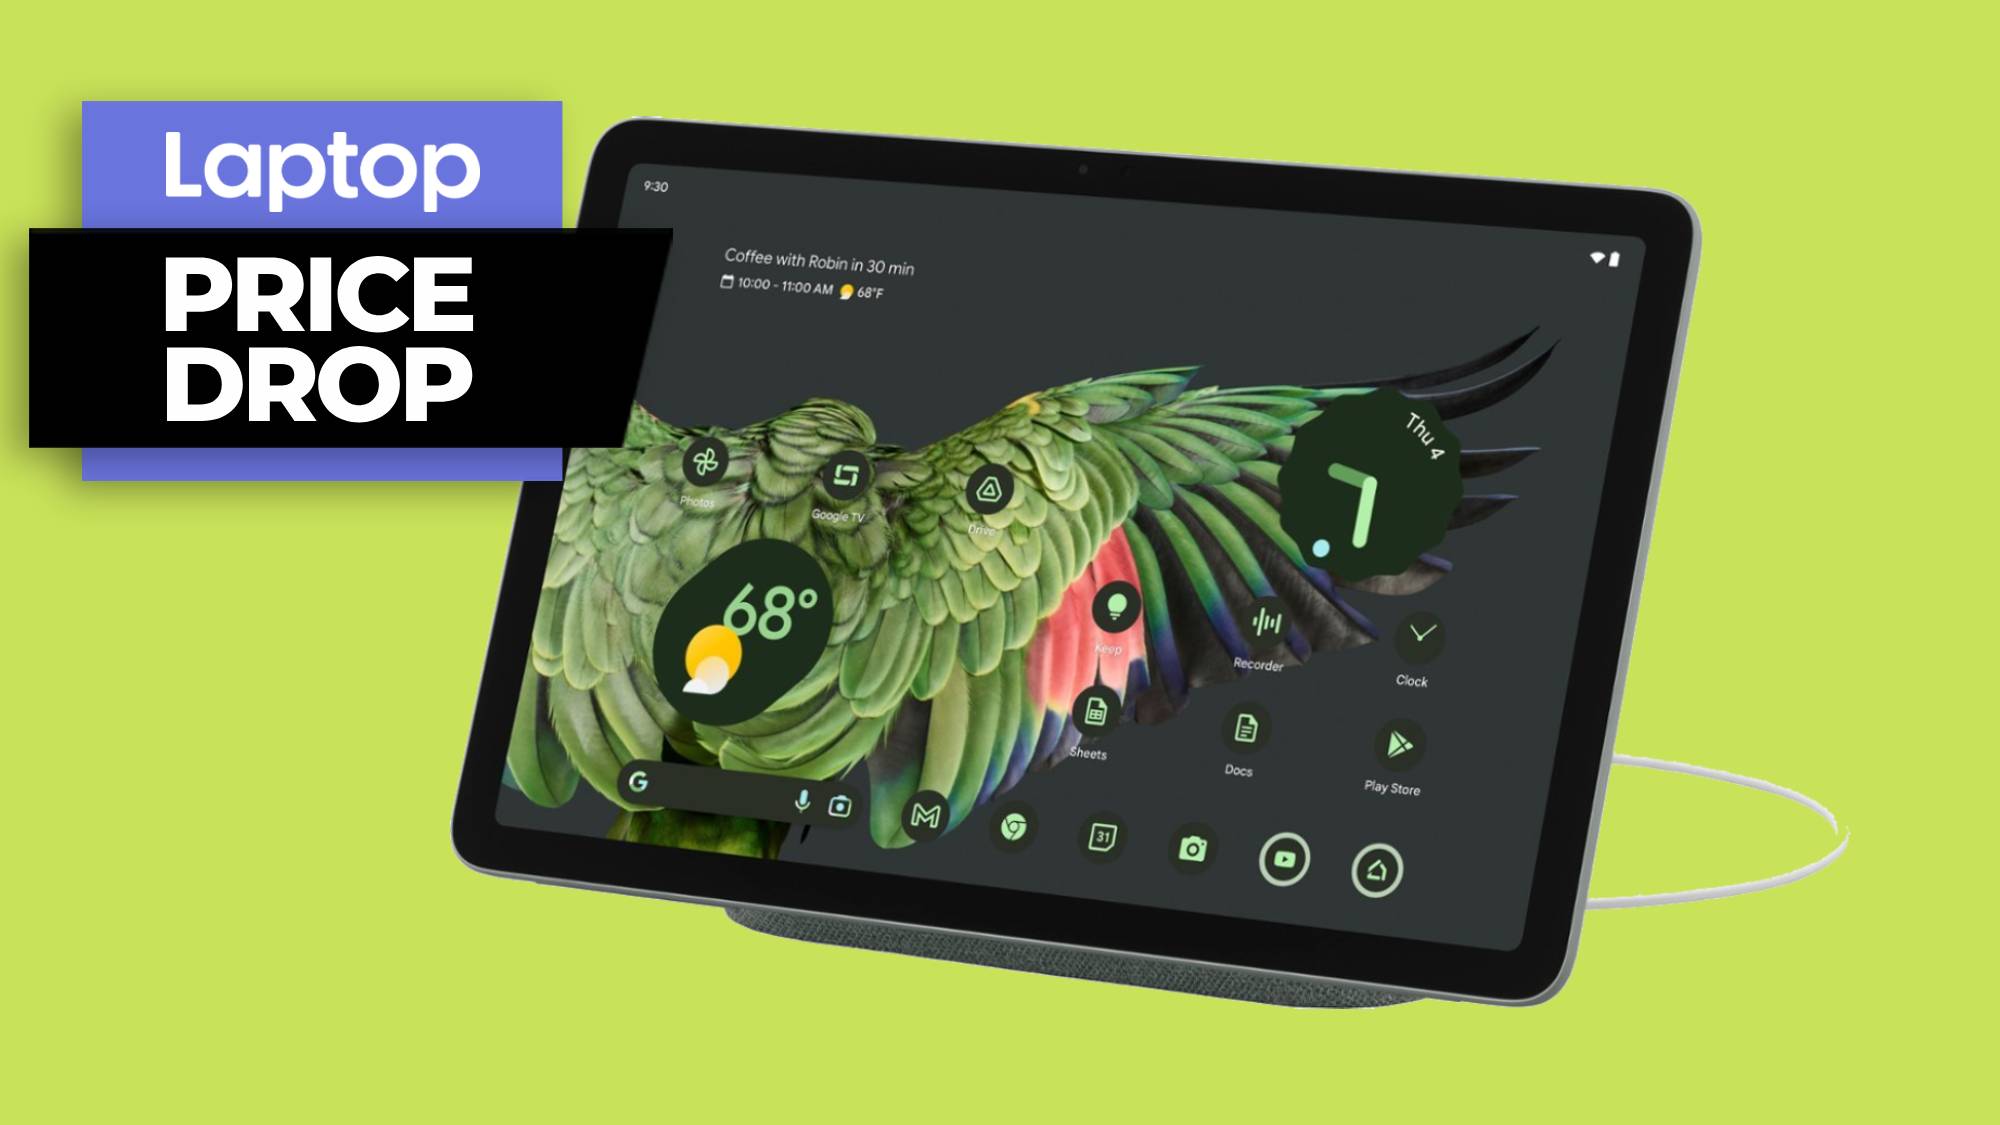 Google Pixel Tablet review - a versatile device that can be used